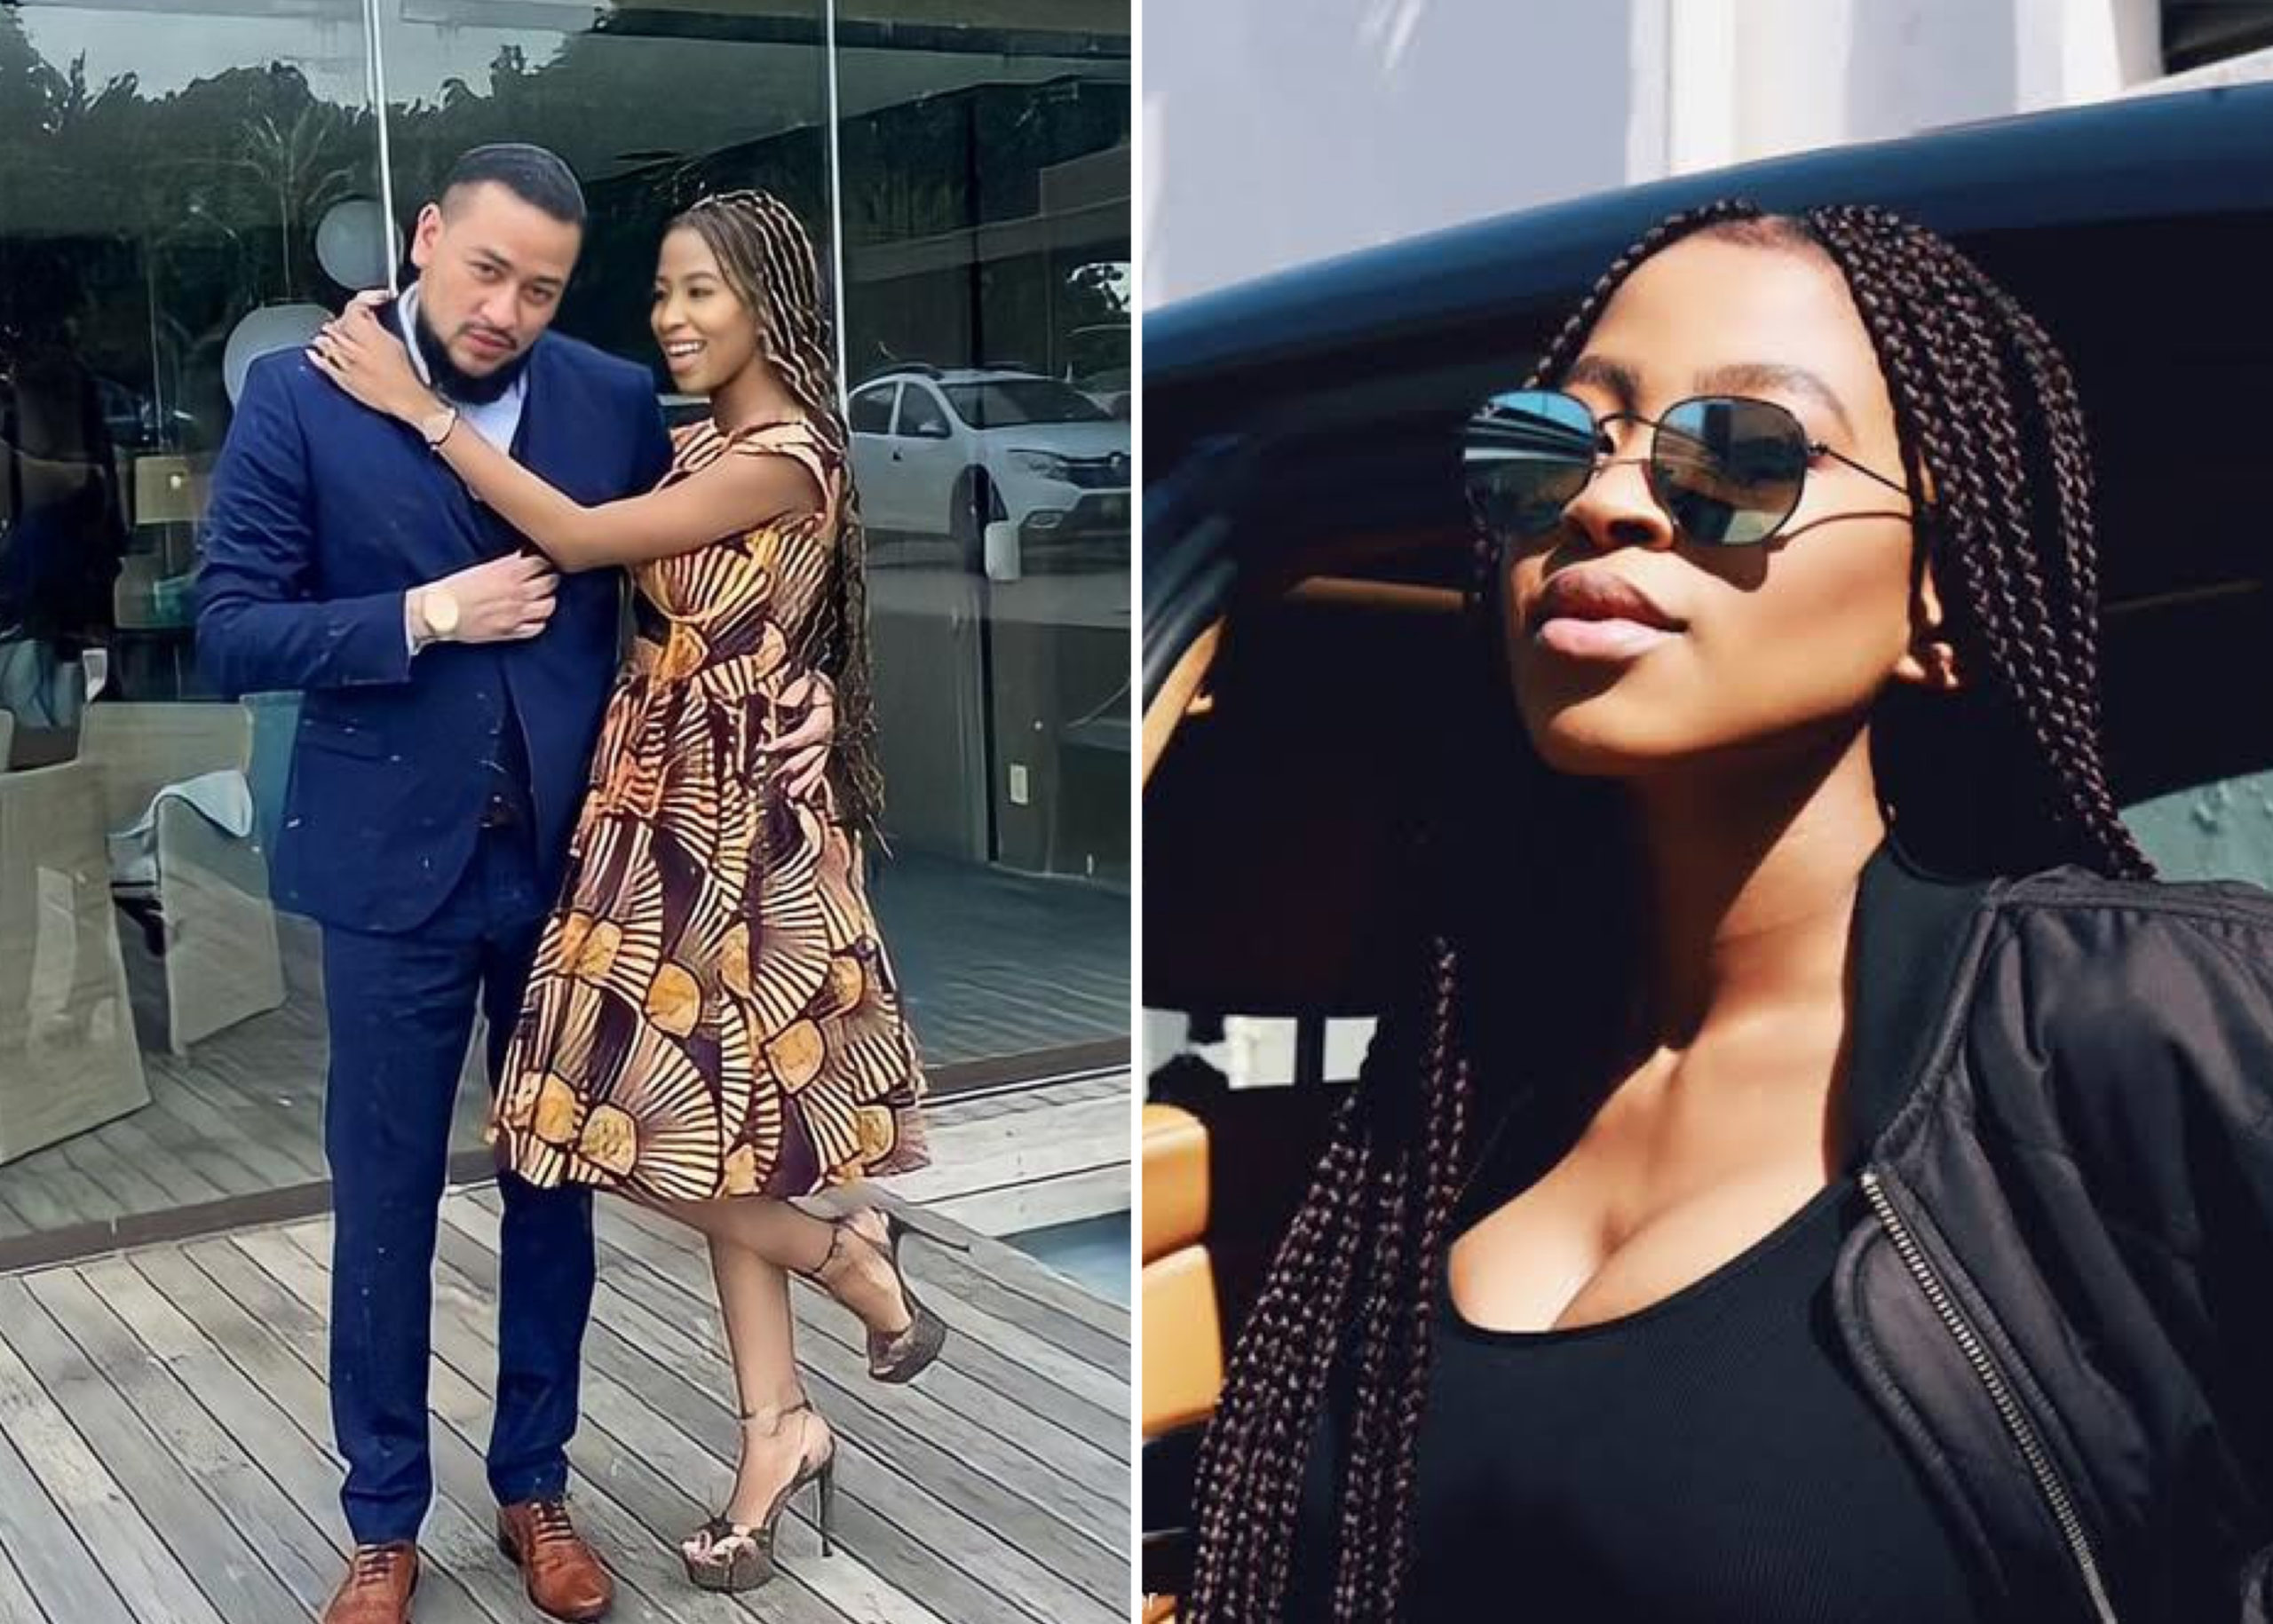 AKA's Family And Late Tembe's Family Confirm Death Of Rapper's 22-Year-Old Fiancée